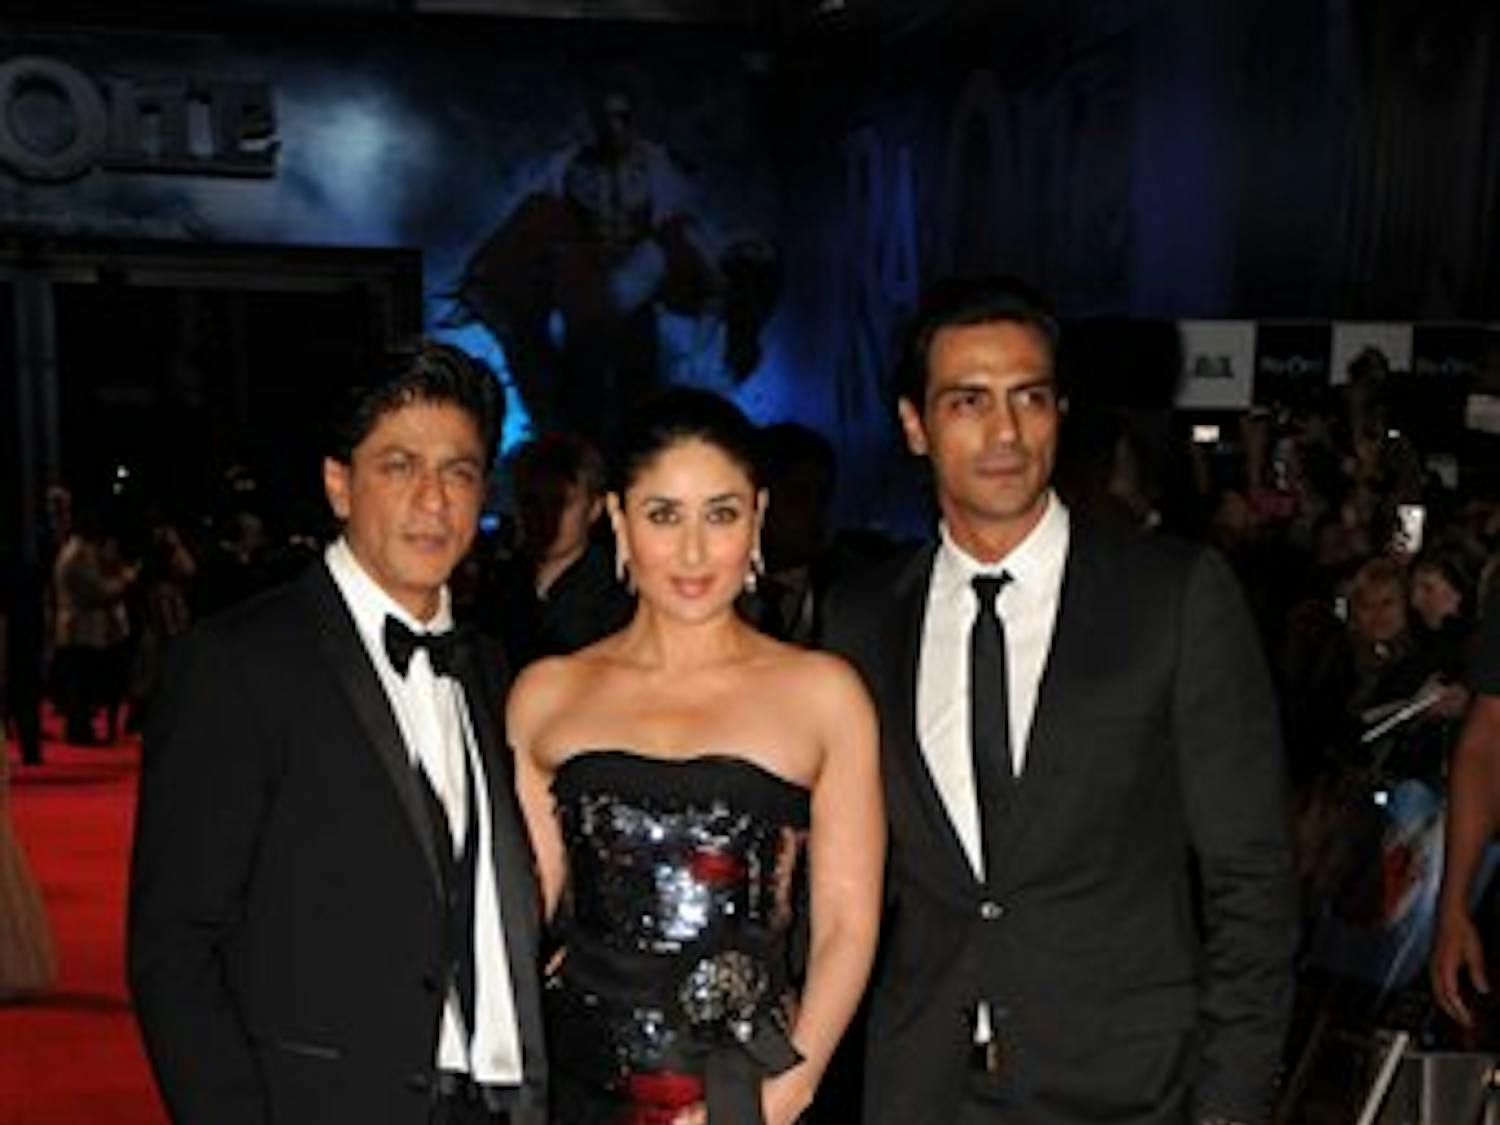 "Ra.One" stars Shahrukh Khan, Kareena Kapoor and Arjun Rampal pose at the film's premiere in London on Tuesday. Among other records, "Ra.One" became the first 3-D Bollywood film to be released in the U.K.